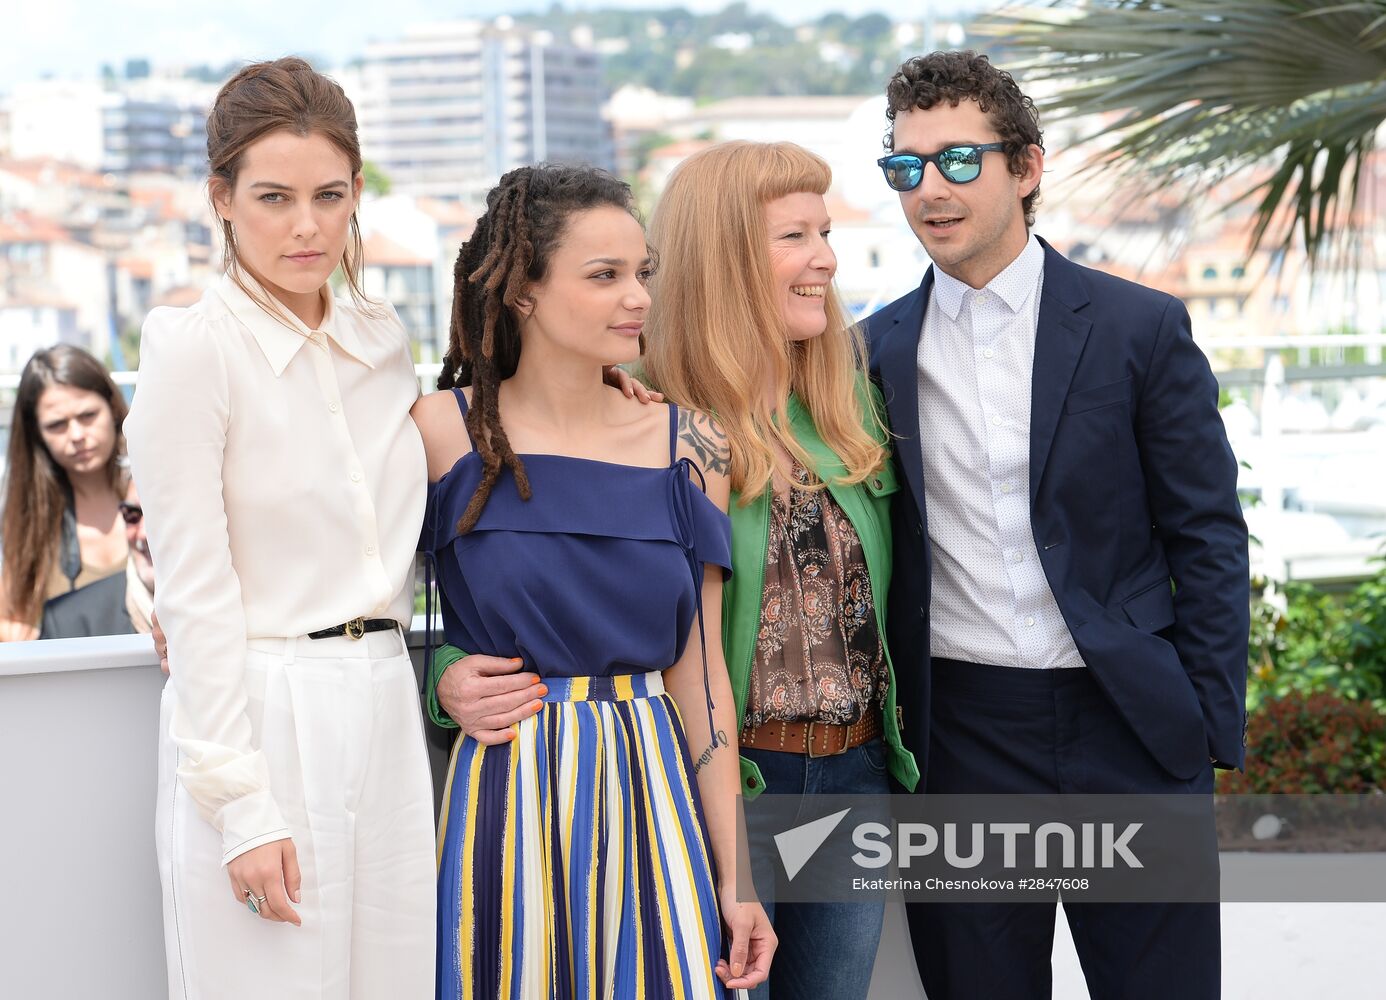 69th Cannes Film Festival. Day 4